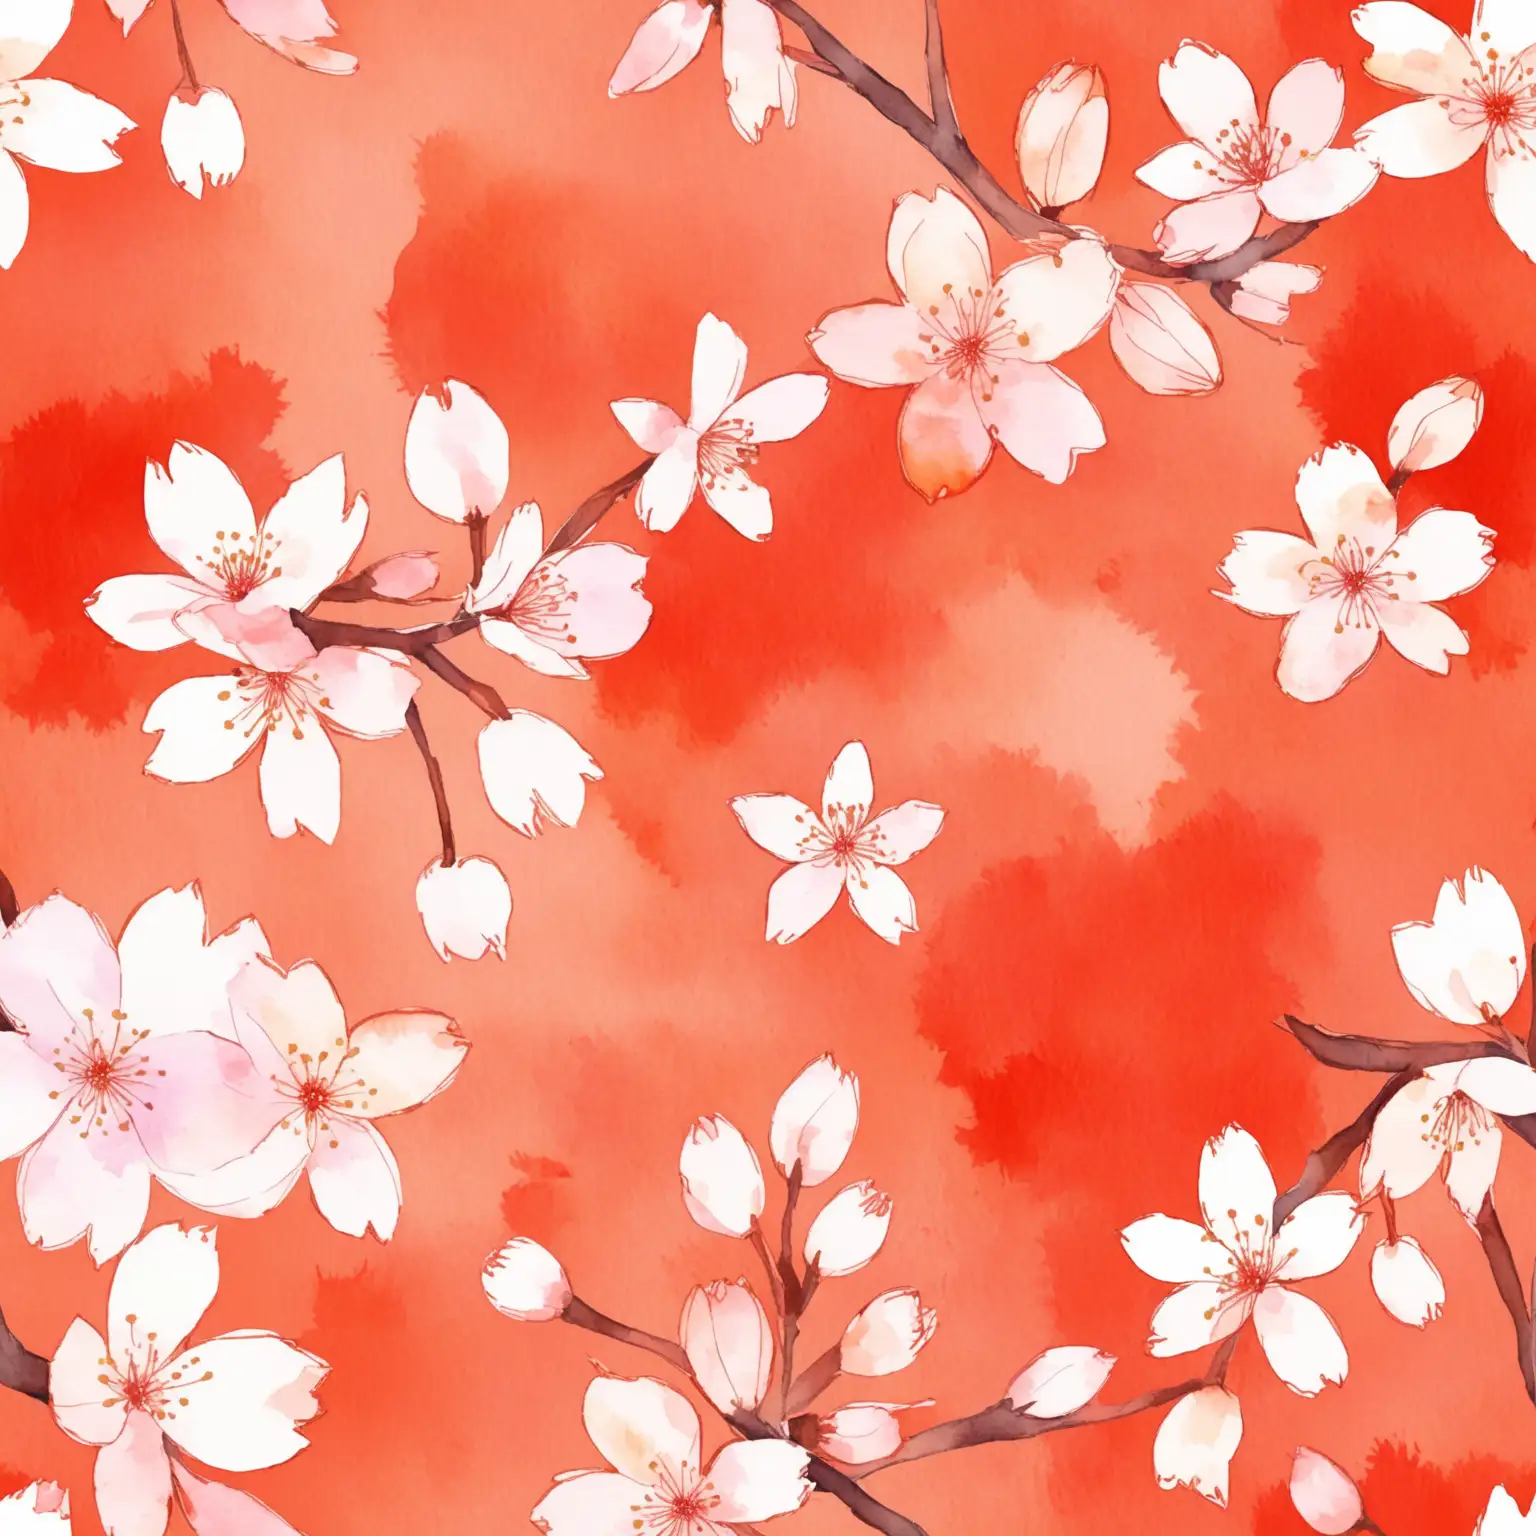 create a watercolor seamless floral pattern of red-orange, cherry blossom white on blush color